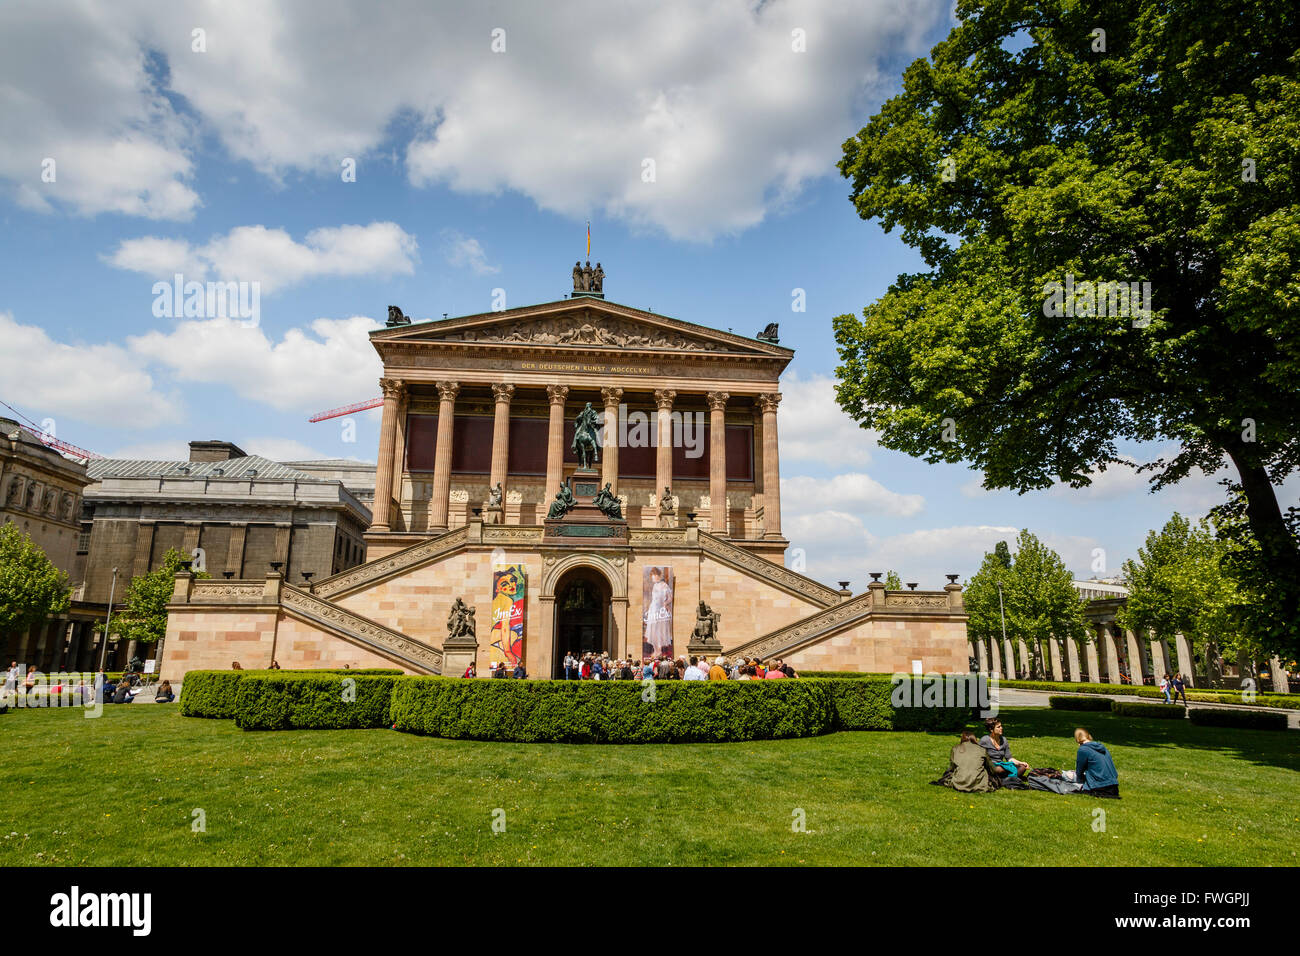 Alte Nationalgalerie (Old National Gallery) at the Museumsinsel (Museum Island), Mitte, Berlin, Germany, Europe Stock Photo